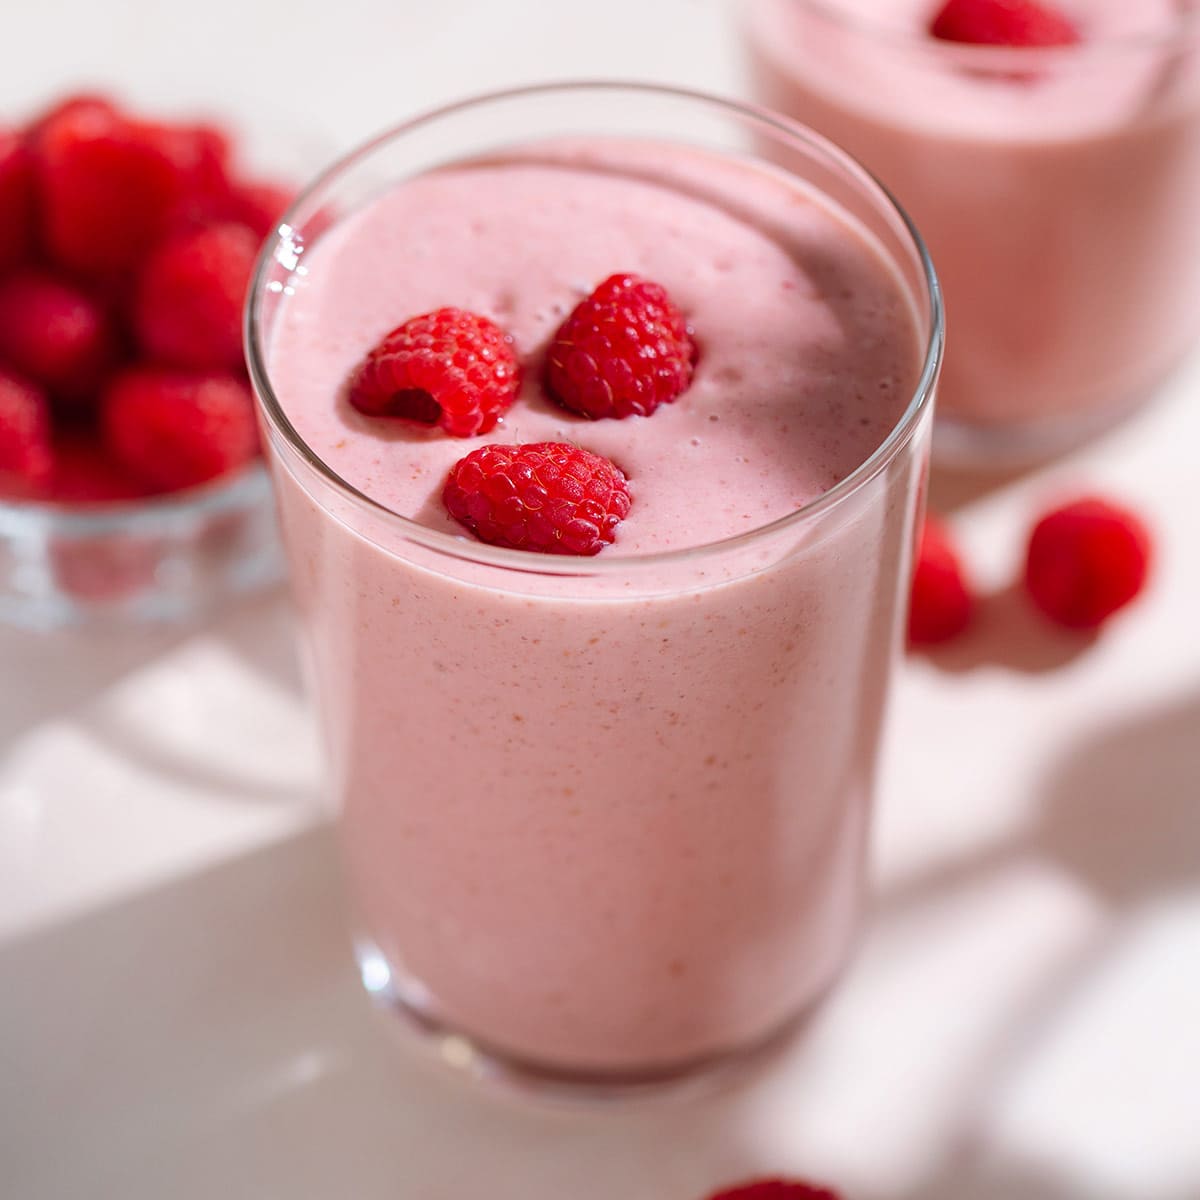 Creamy pink smoothie in a tall glass garnished with fresh raspberries on top.